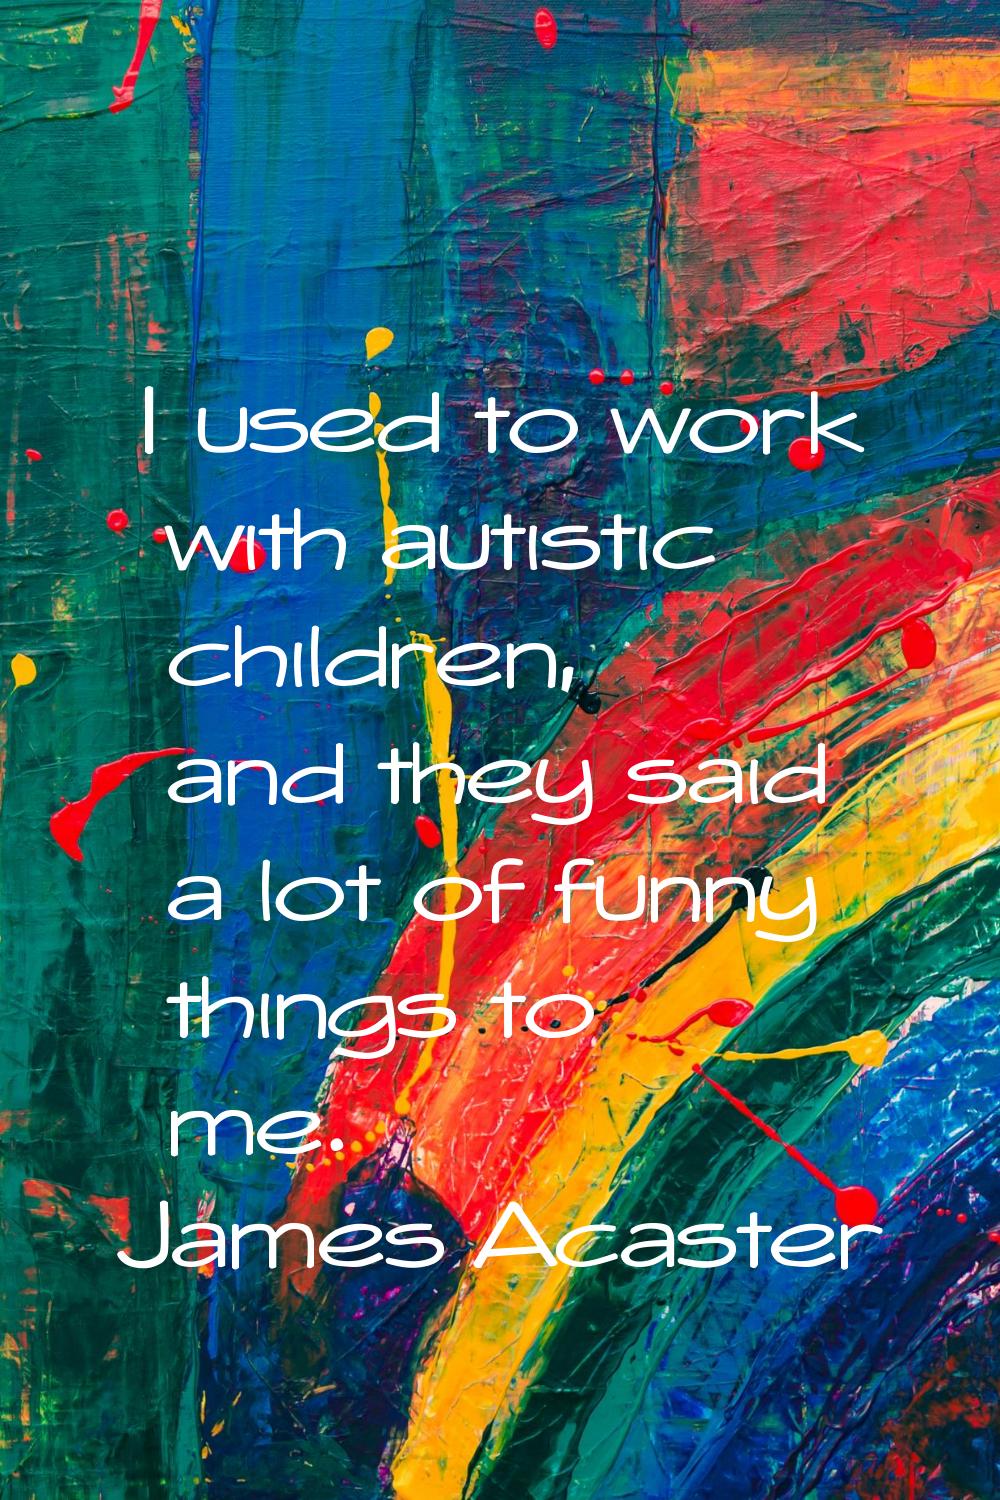 I used to work with autistic children, and they said a lot of funny things to me.